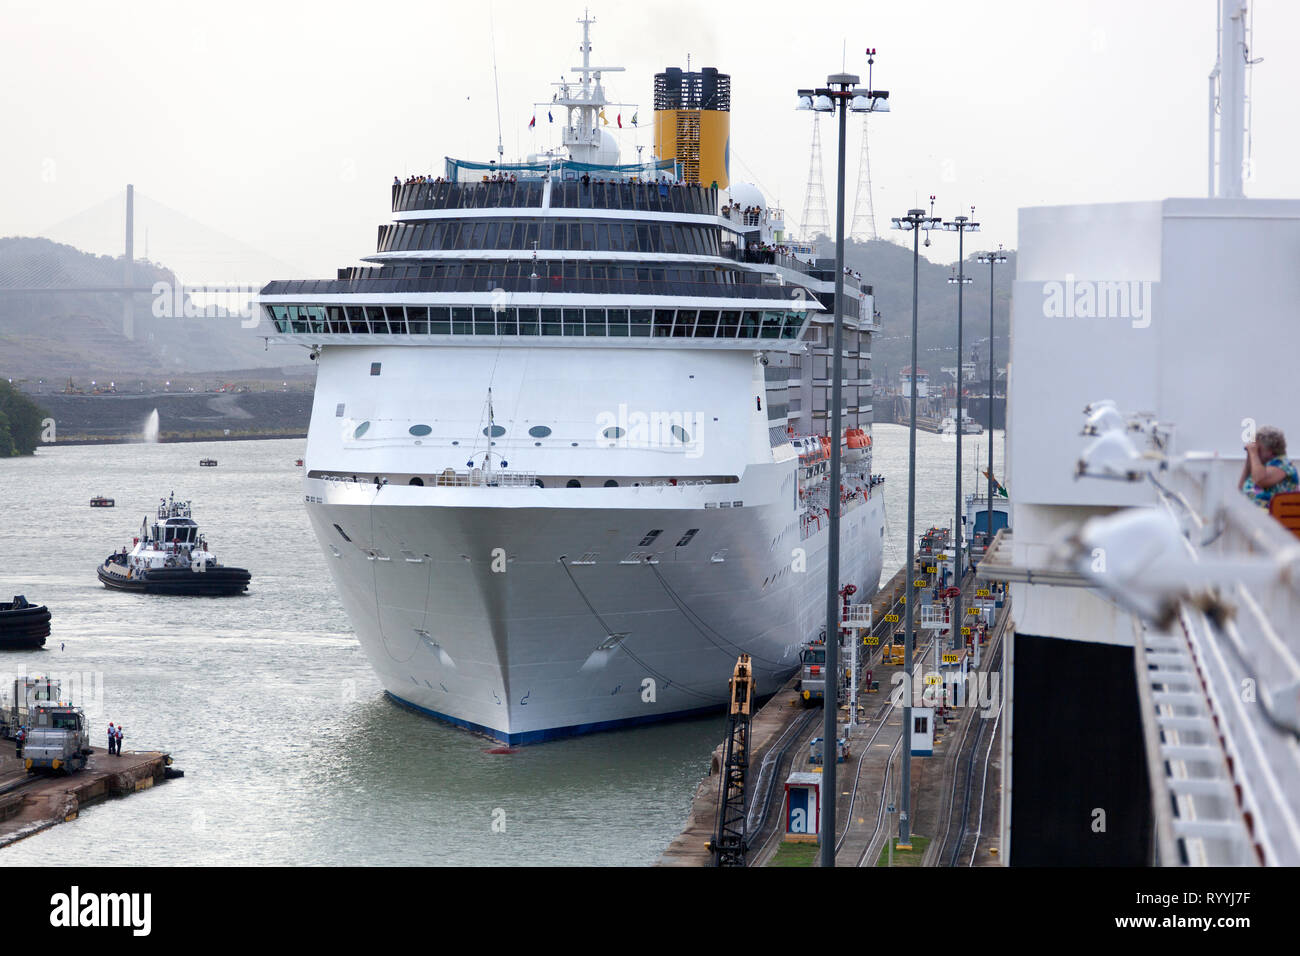 The cruise ship is being pulled by land transportation through narrow canal entrance (Panama). Stock Photo